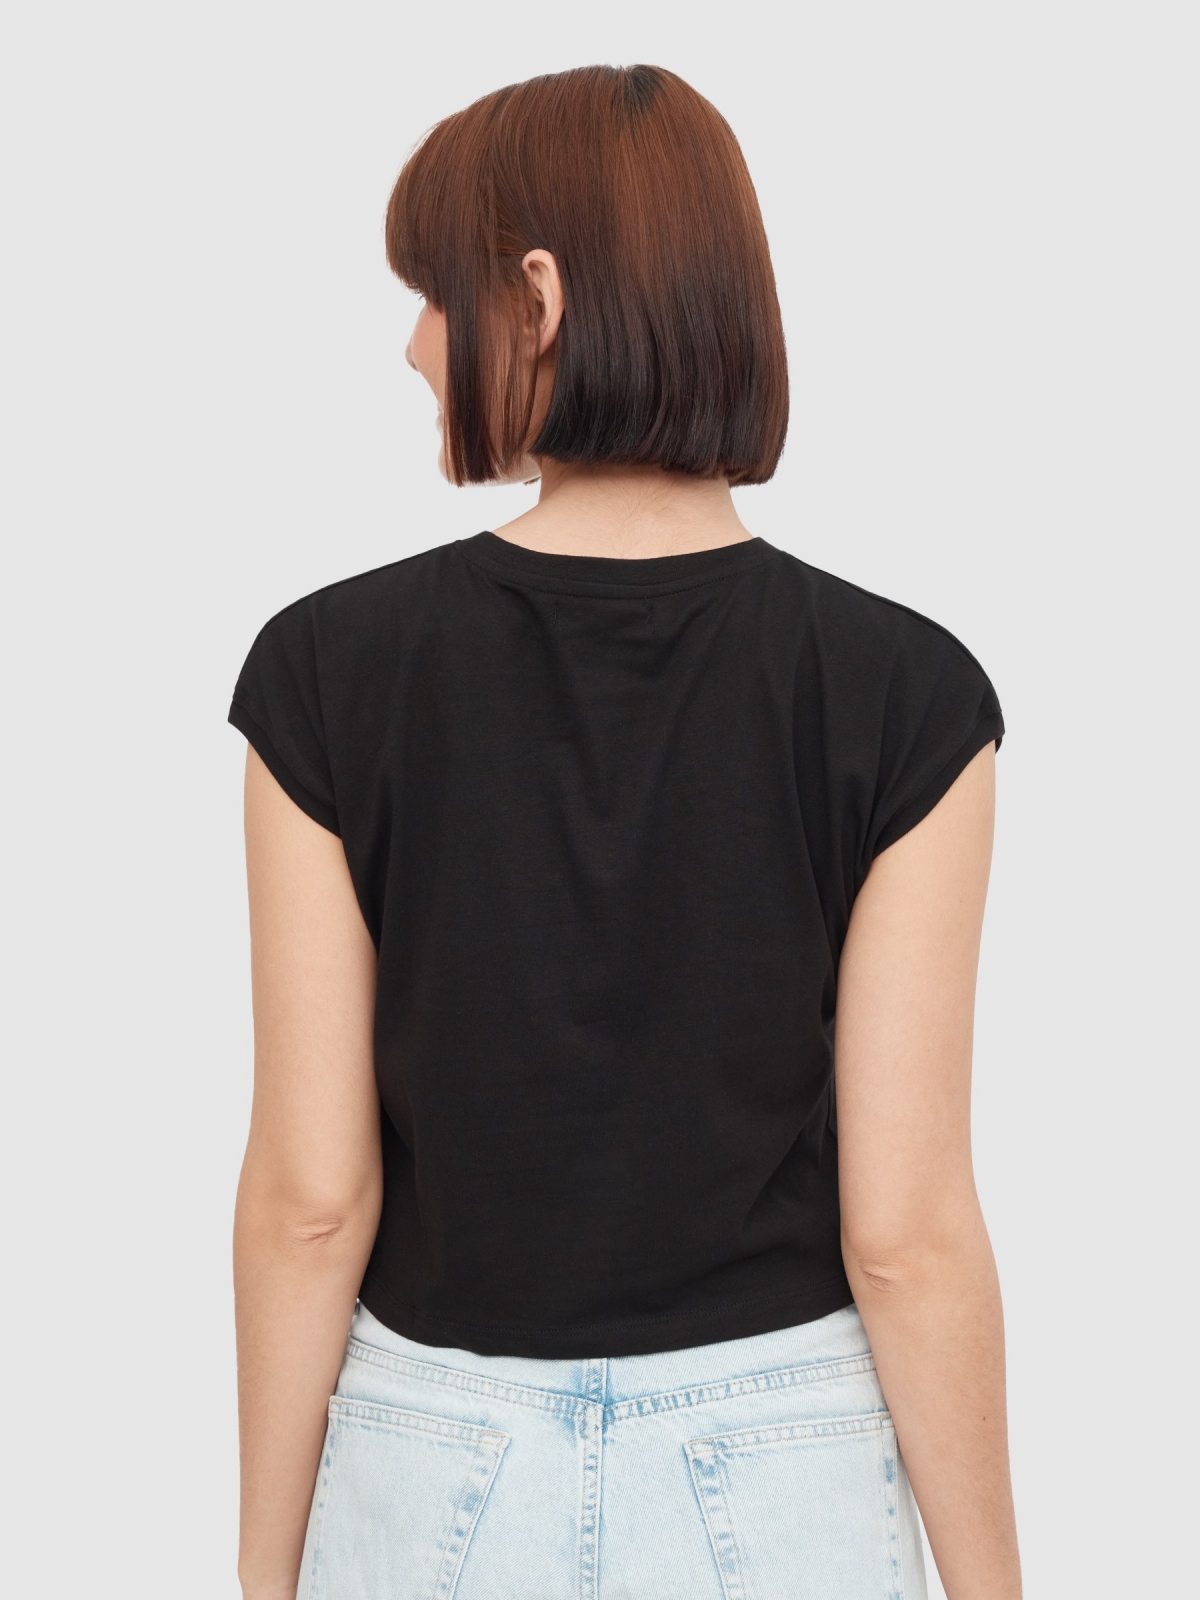 Basic sleeveless top black middle back view